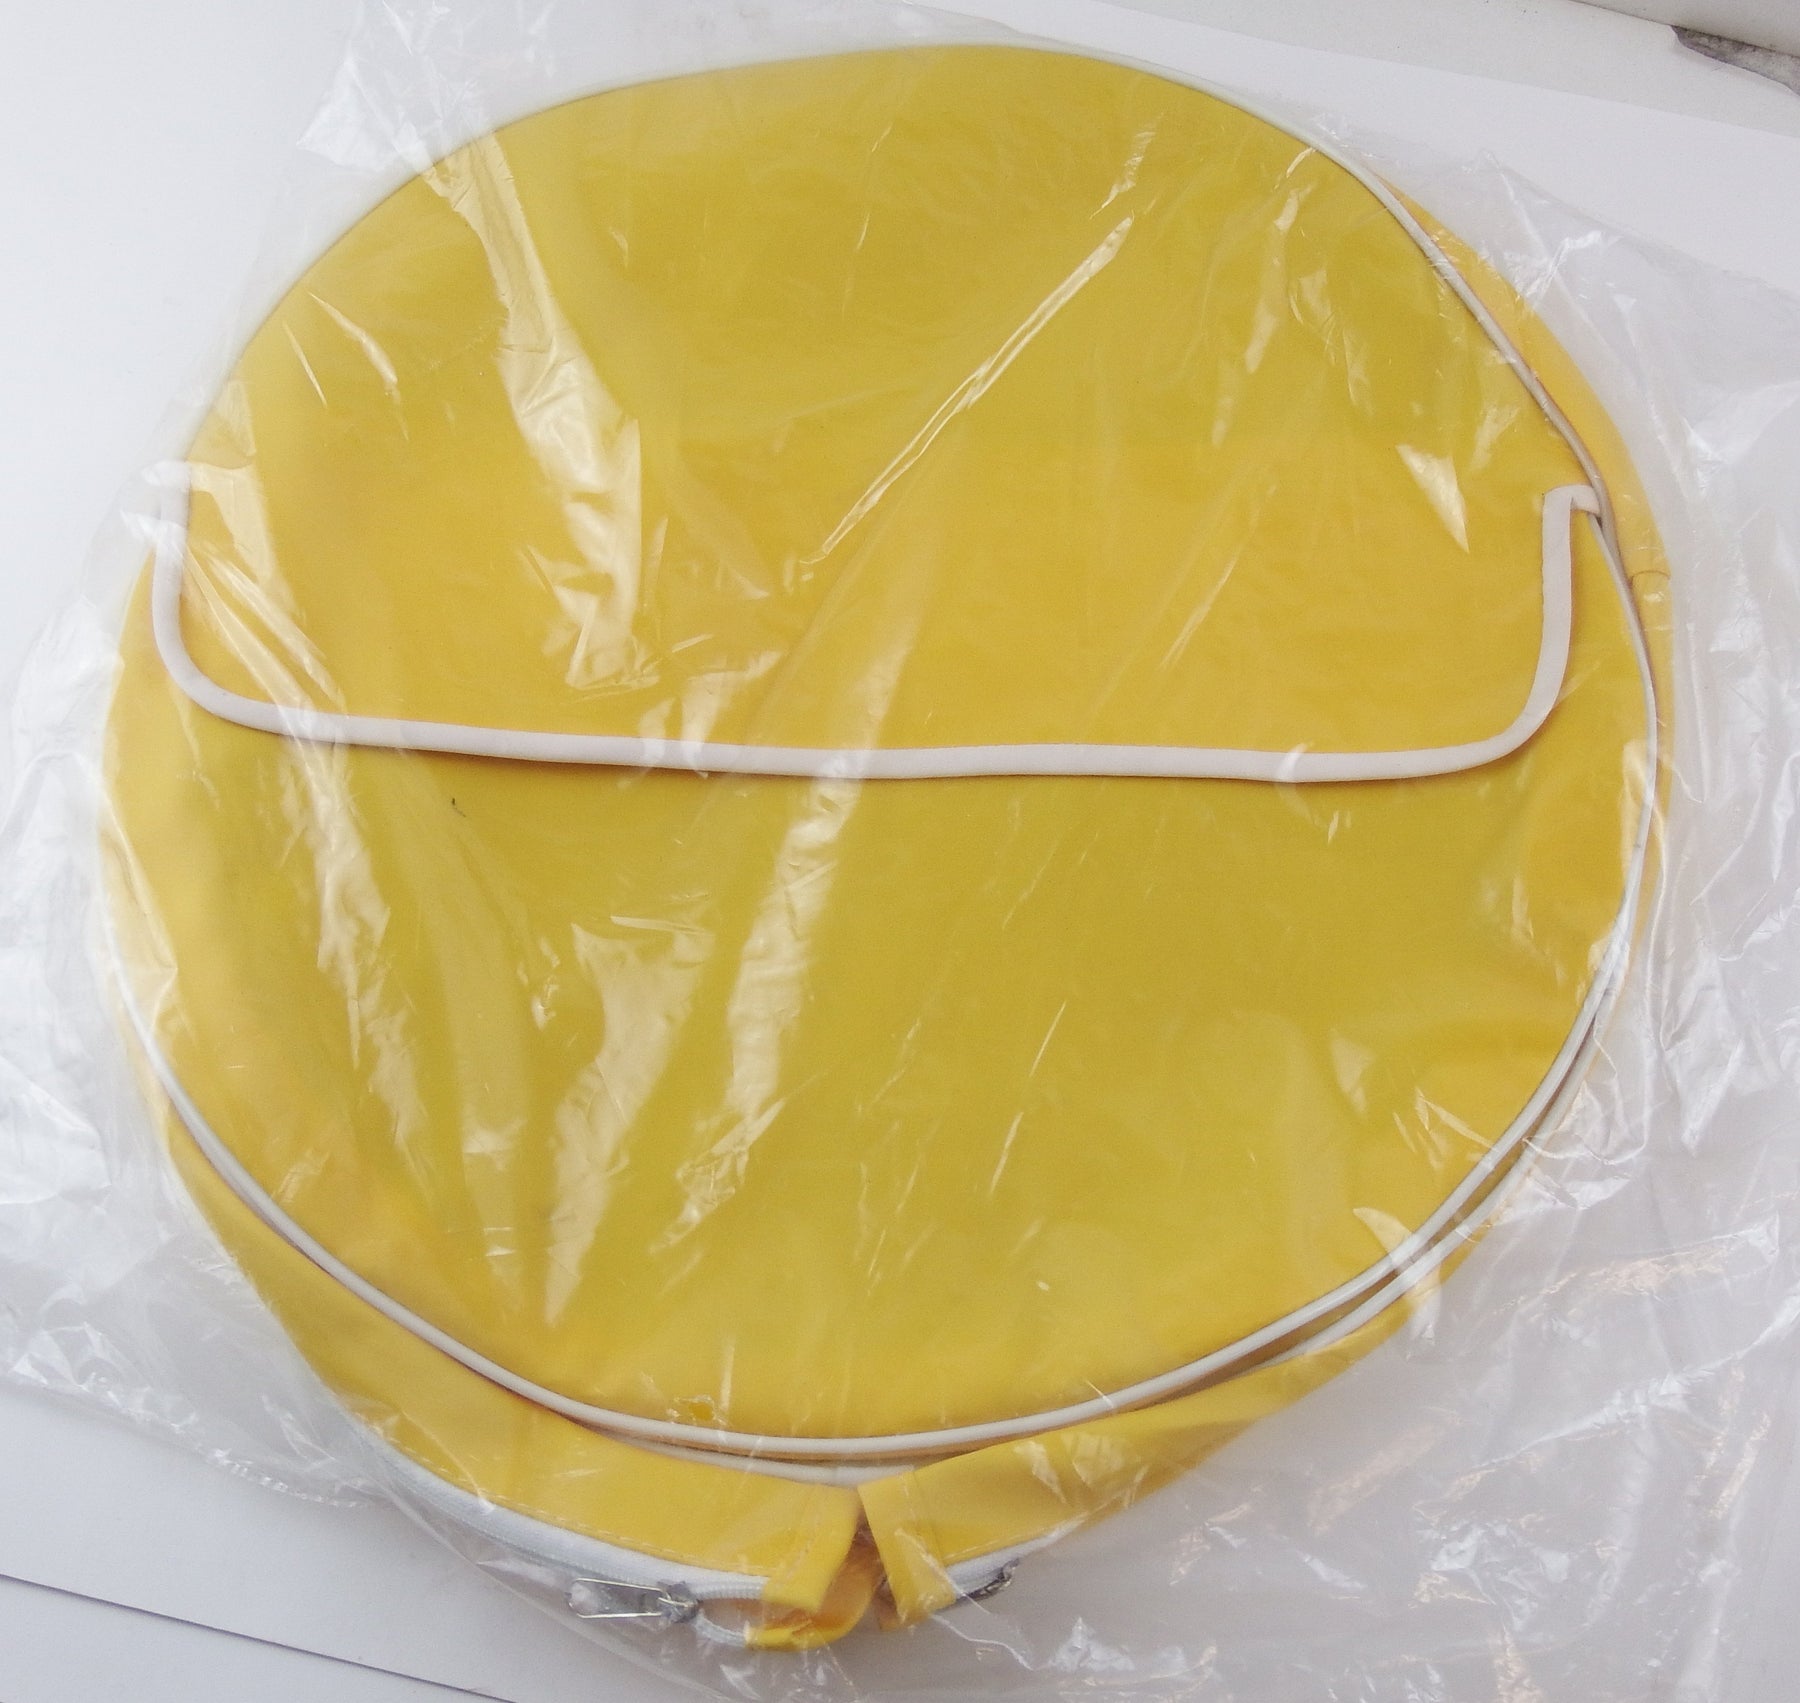 Wheel - Spare Wheel Cover 10" - Zipped - Yellow White Piping